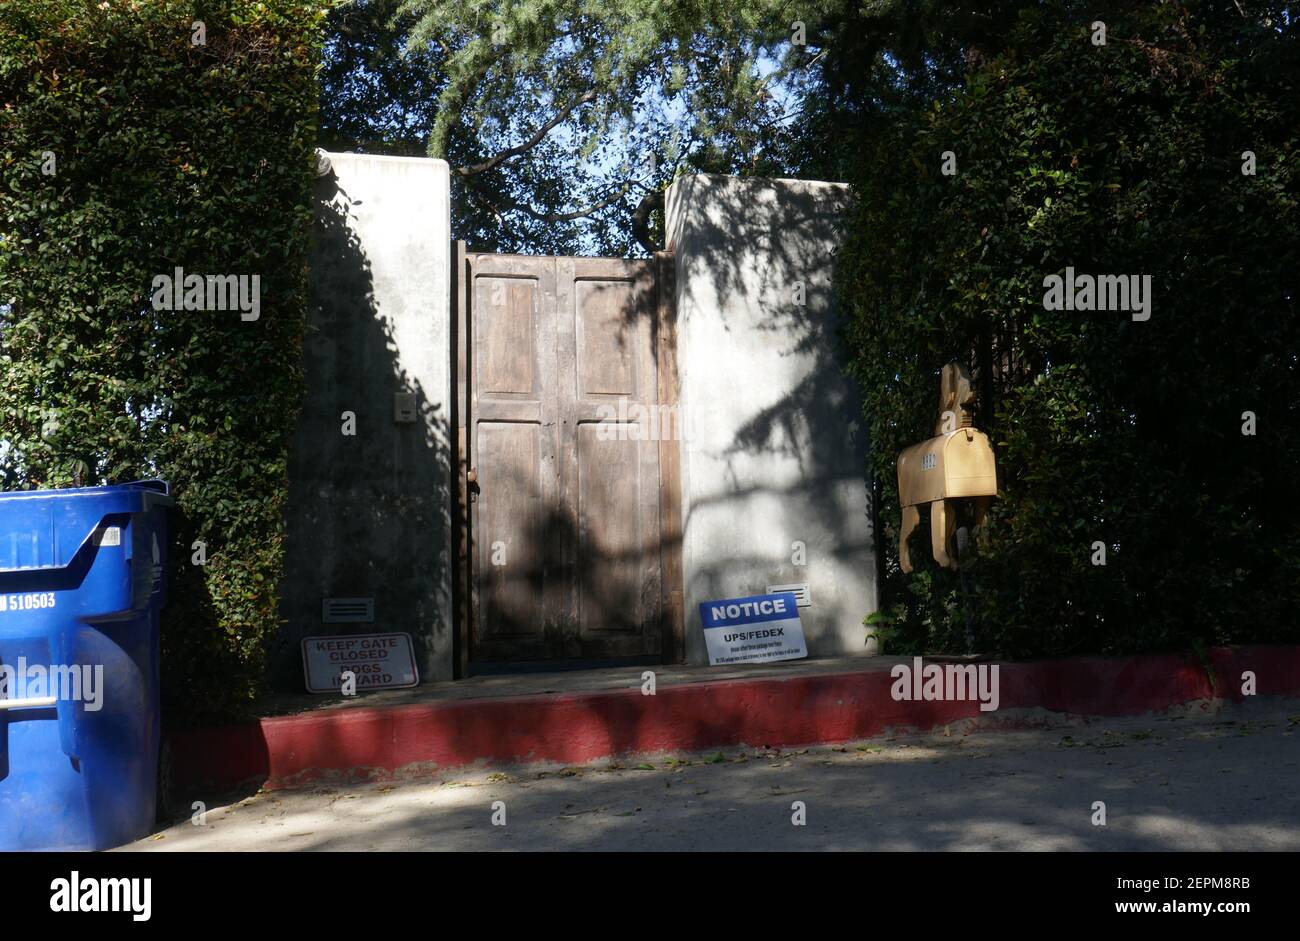 Los Angeles, California, USA 27th February 2021 A general view of atmosphere of actor Adam Baldwin's former home/house on February 27, 2021 in Los Angeles, California, USA. Photo by Barry King/Alamy Stock Photo Stock Photo